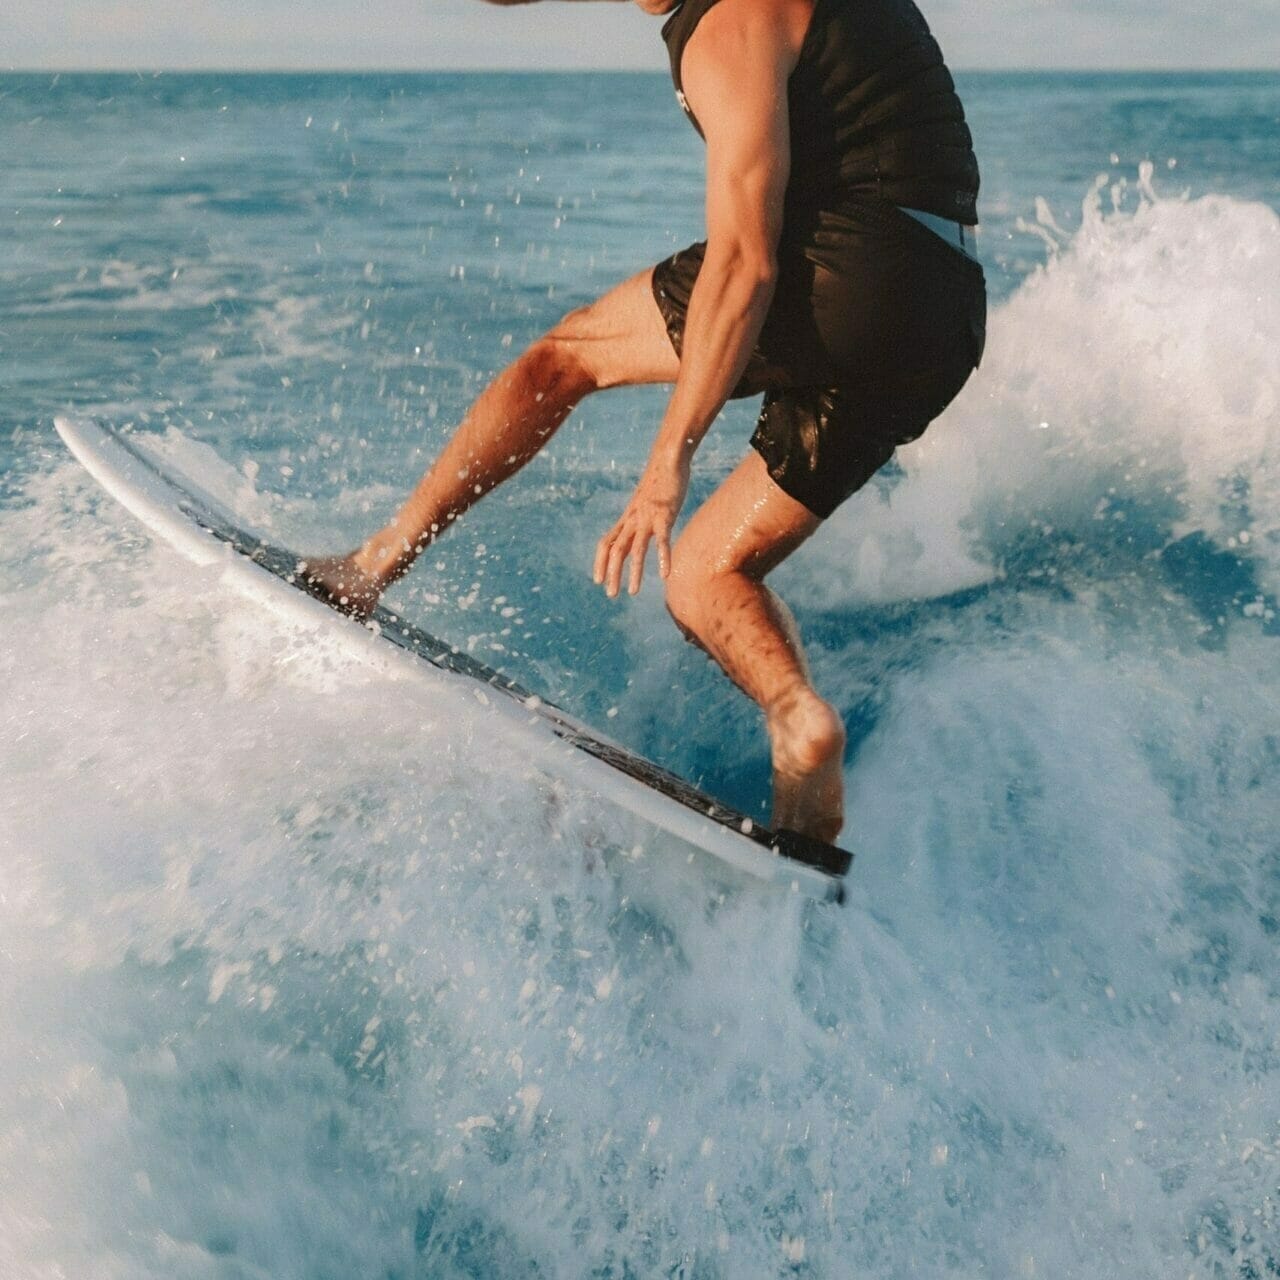 A man surfing on a Supreme surfboard.